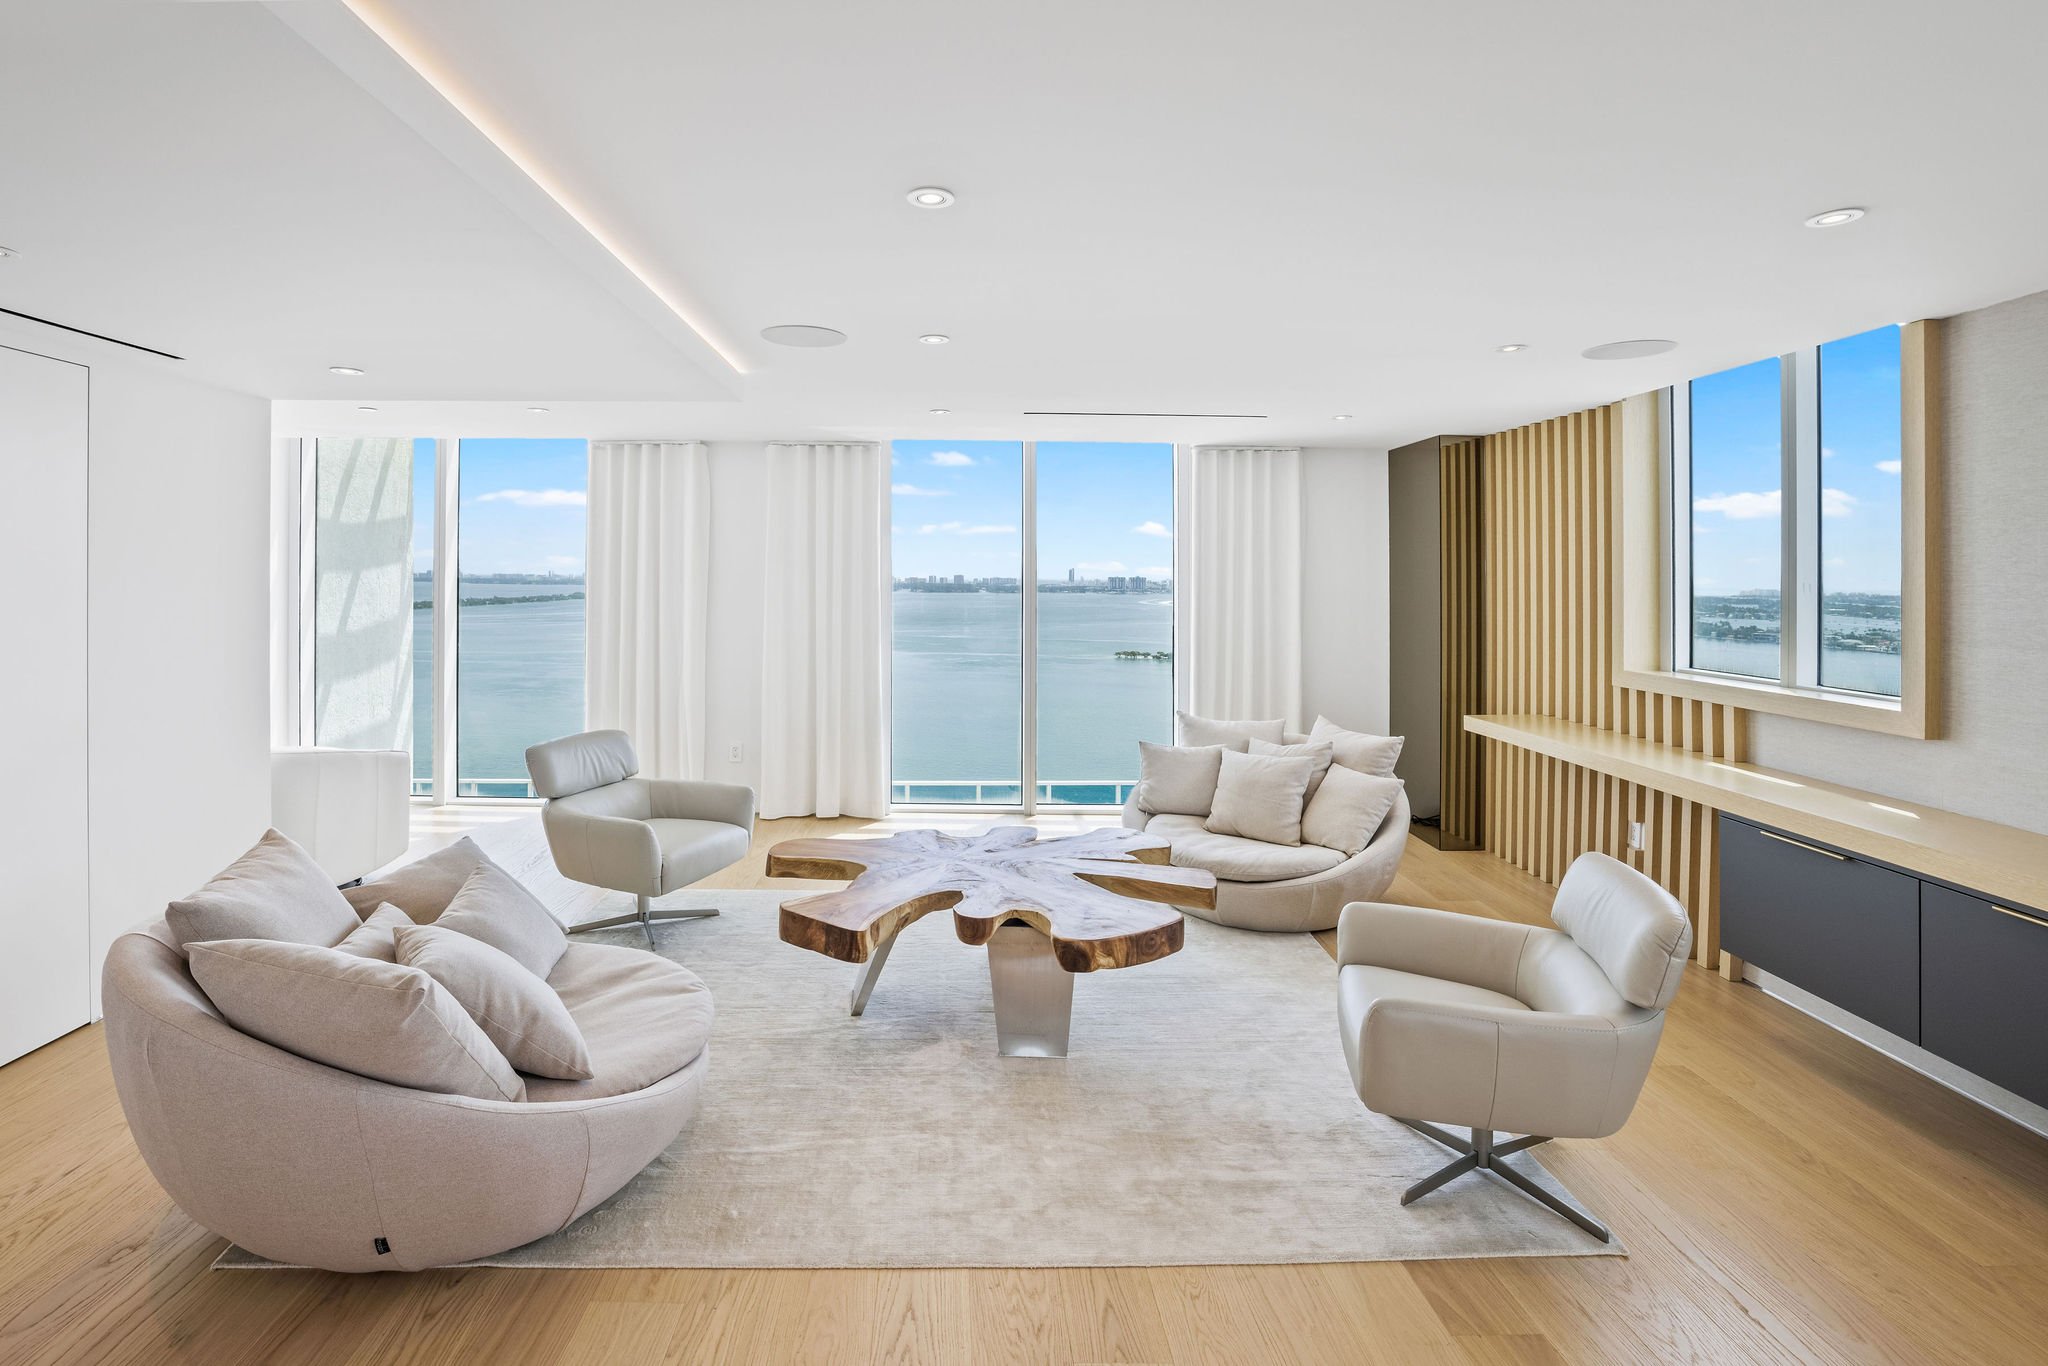 Mater Brokers Forum Listing: Check Out this Edgewater Penthouse With Incredible Views of Biscayne Bay Asking $6.25 Million 9.jpg